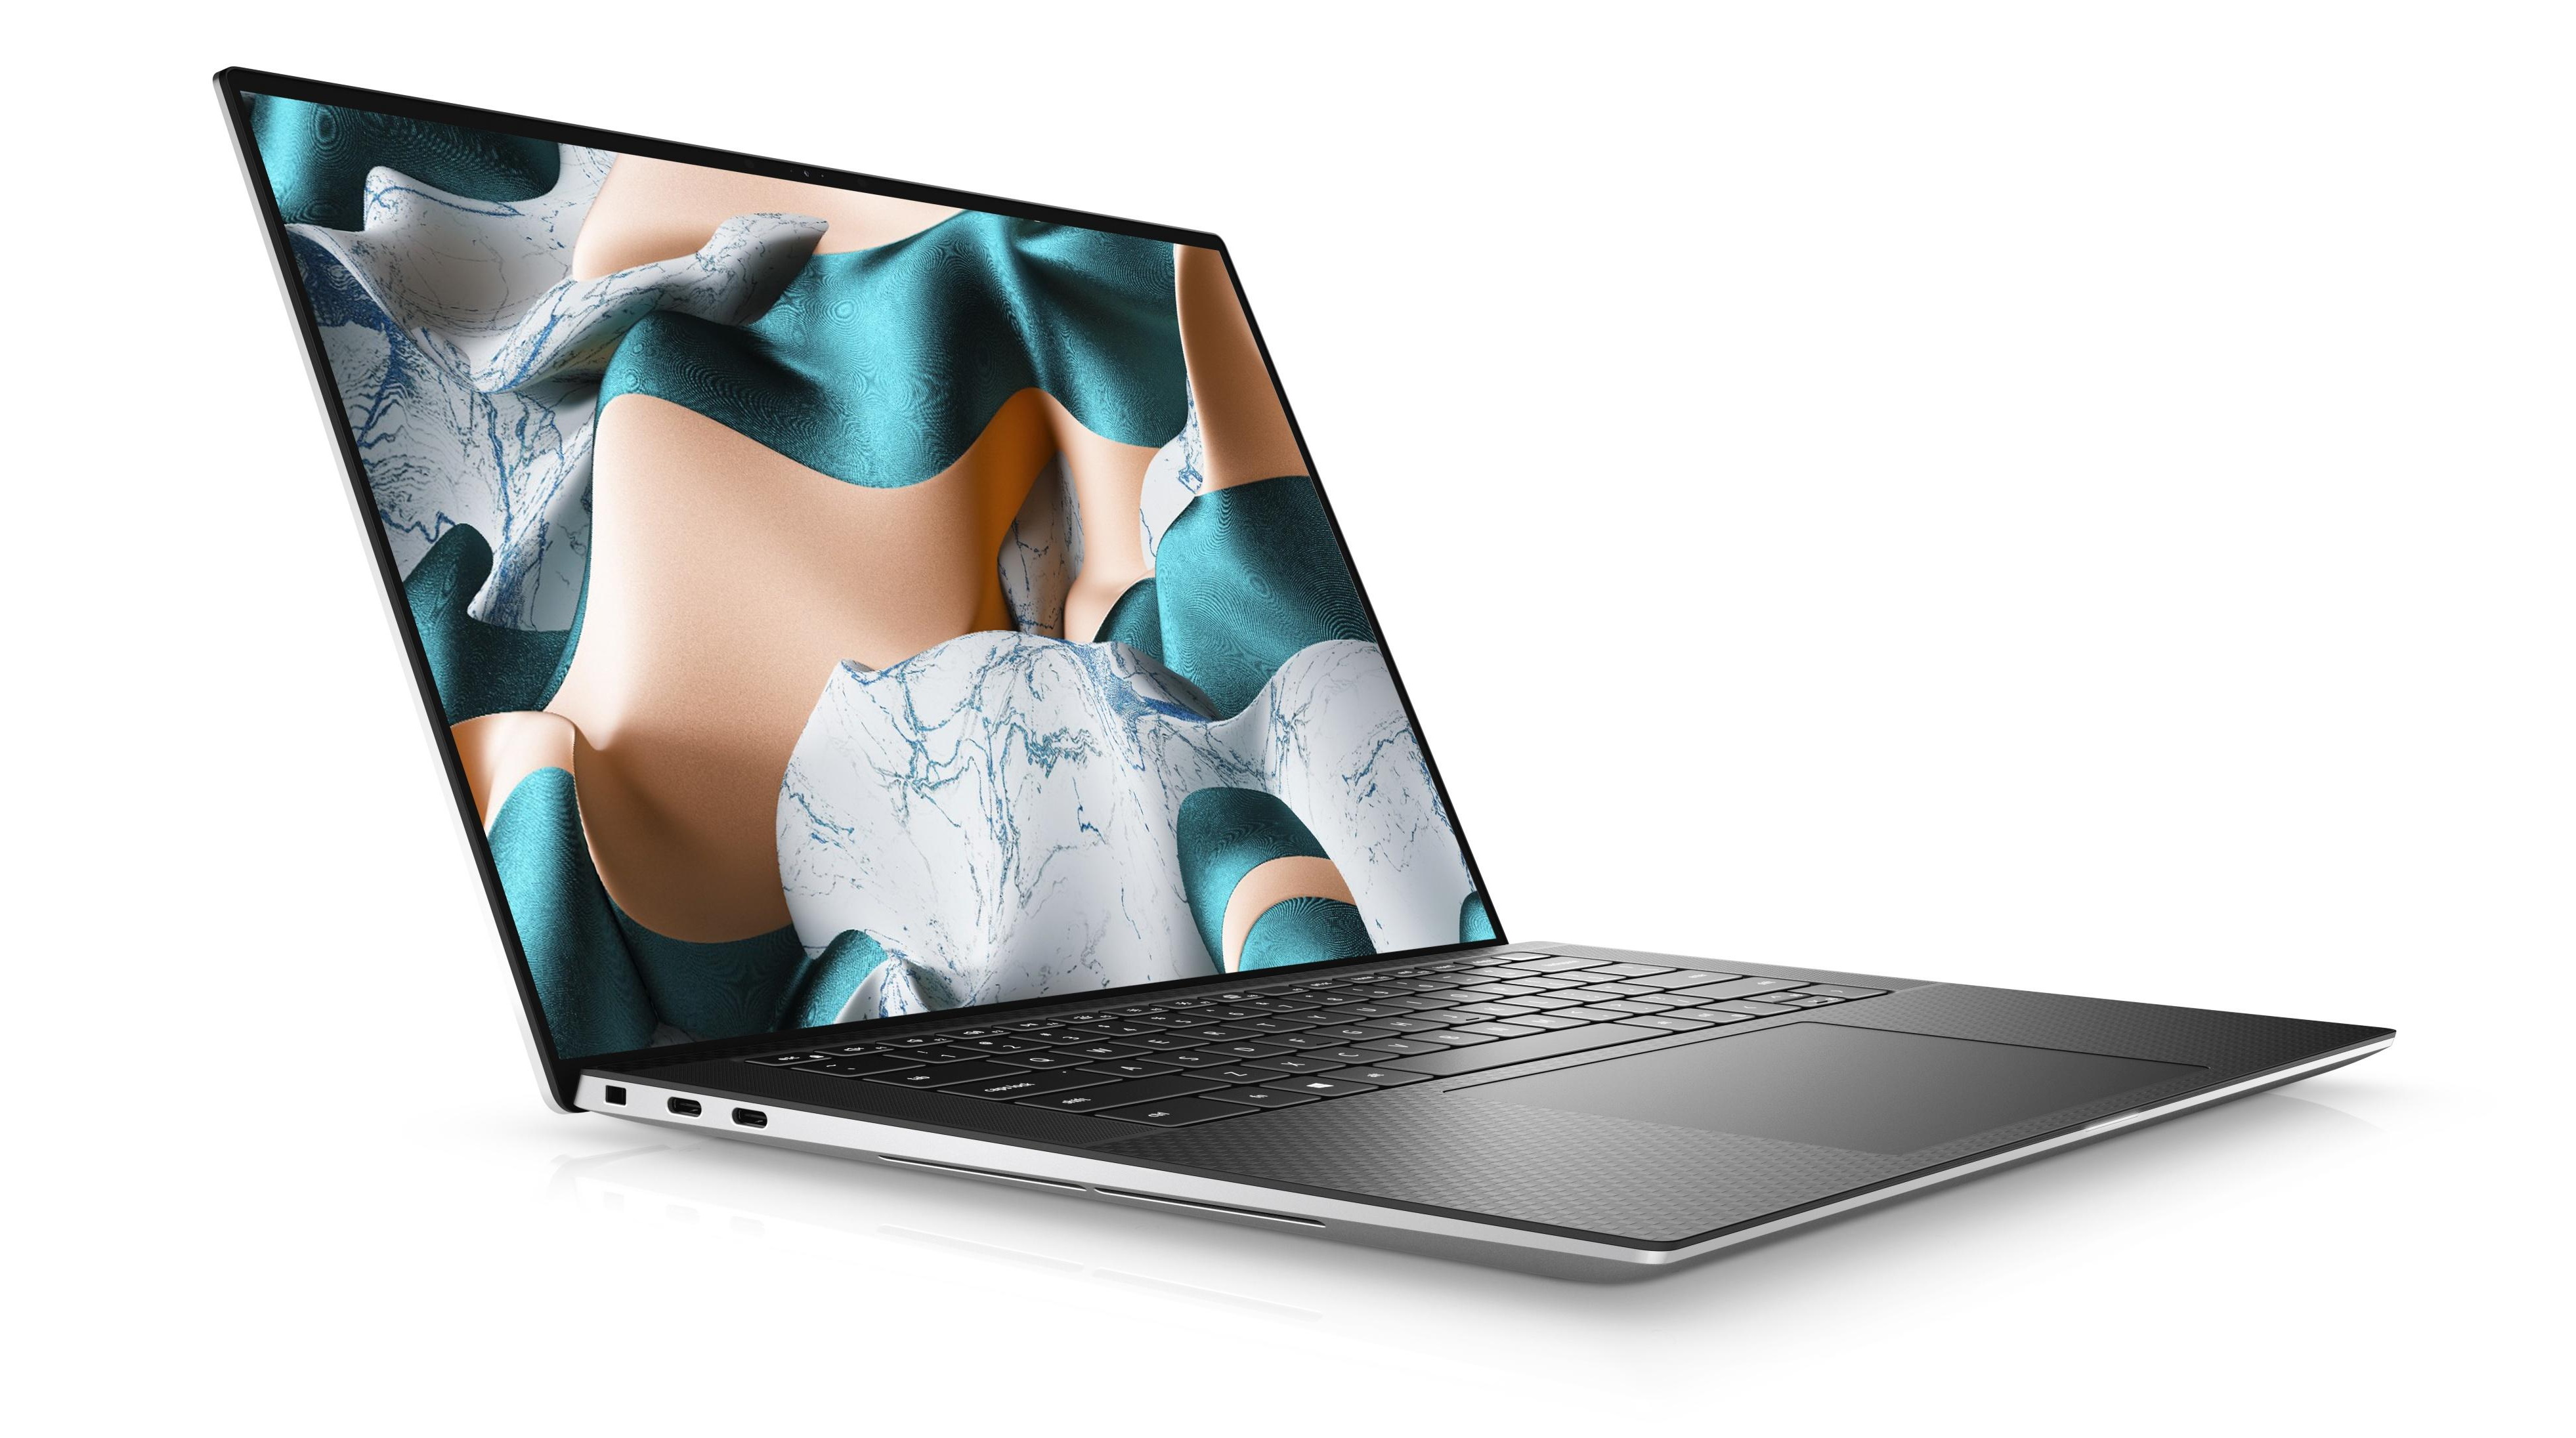 Dell XPS 15, one of the best laptops for engineering students, against a white background